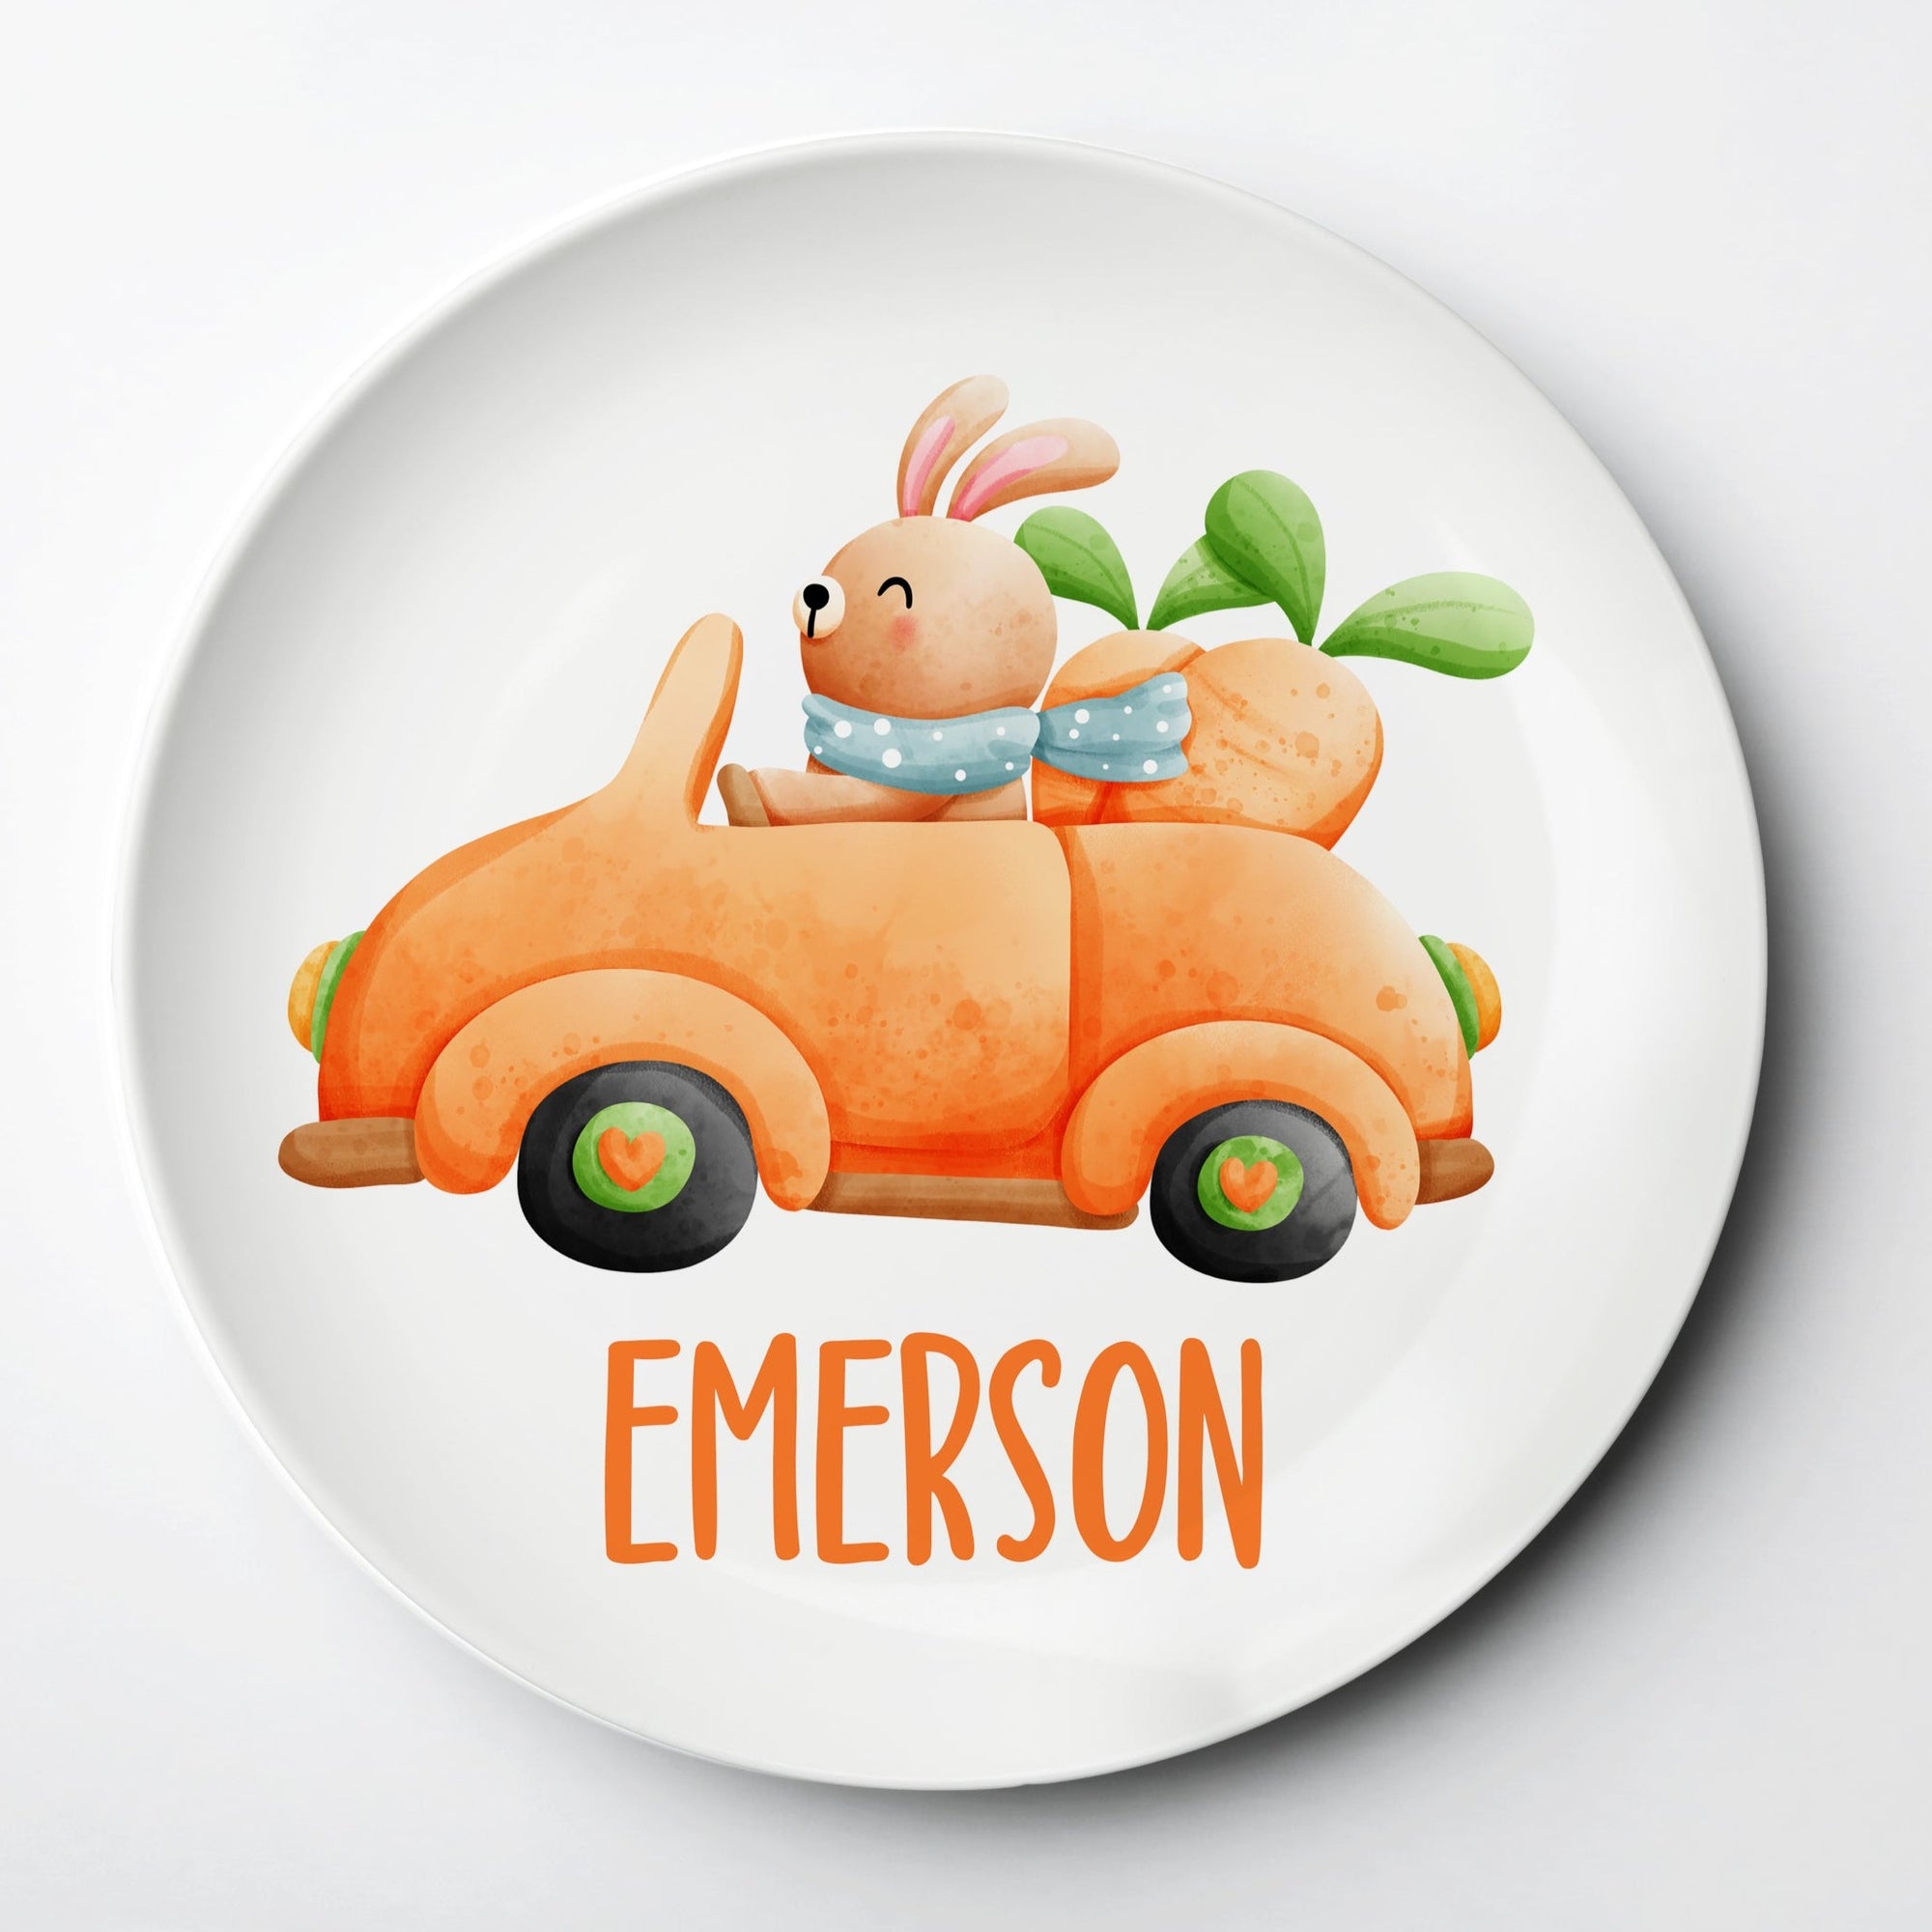 Personalized Kids Easter Plate featuring the Easter Bunny in a Carrot Car, reusable plate will last for years, from Pipsy.com